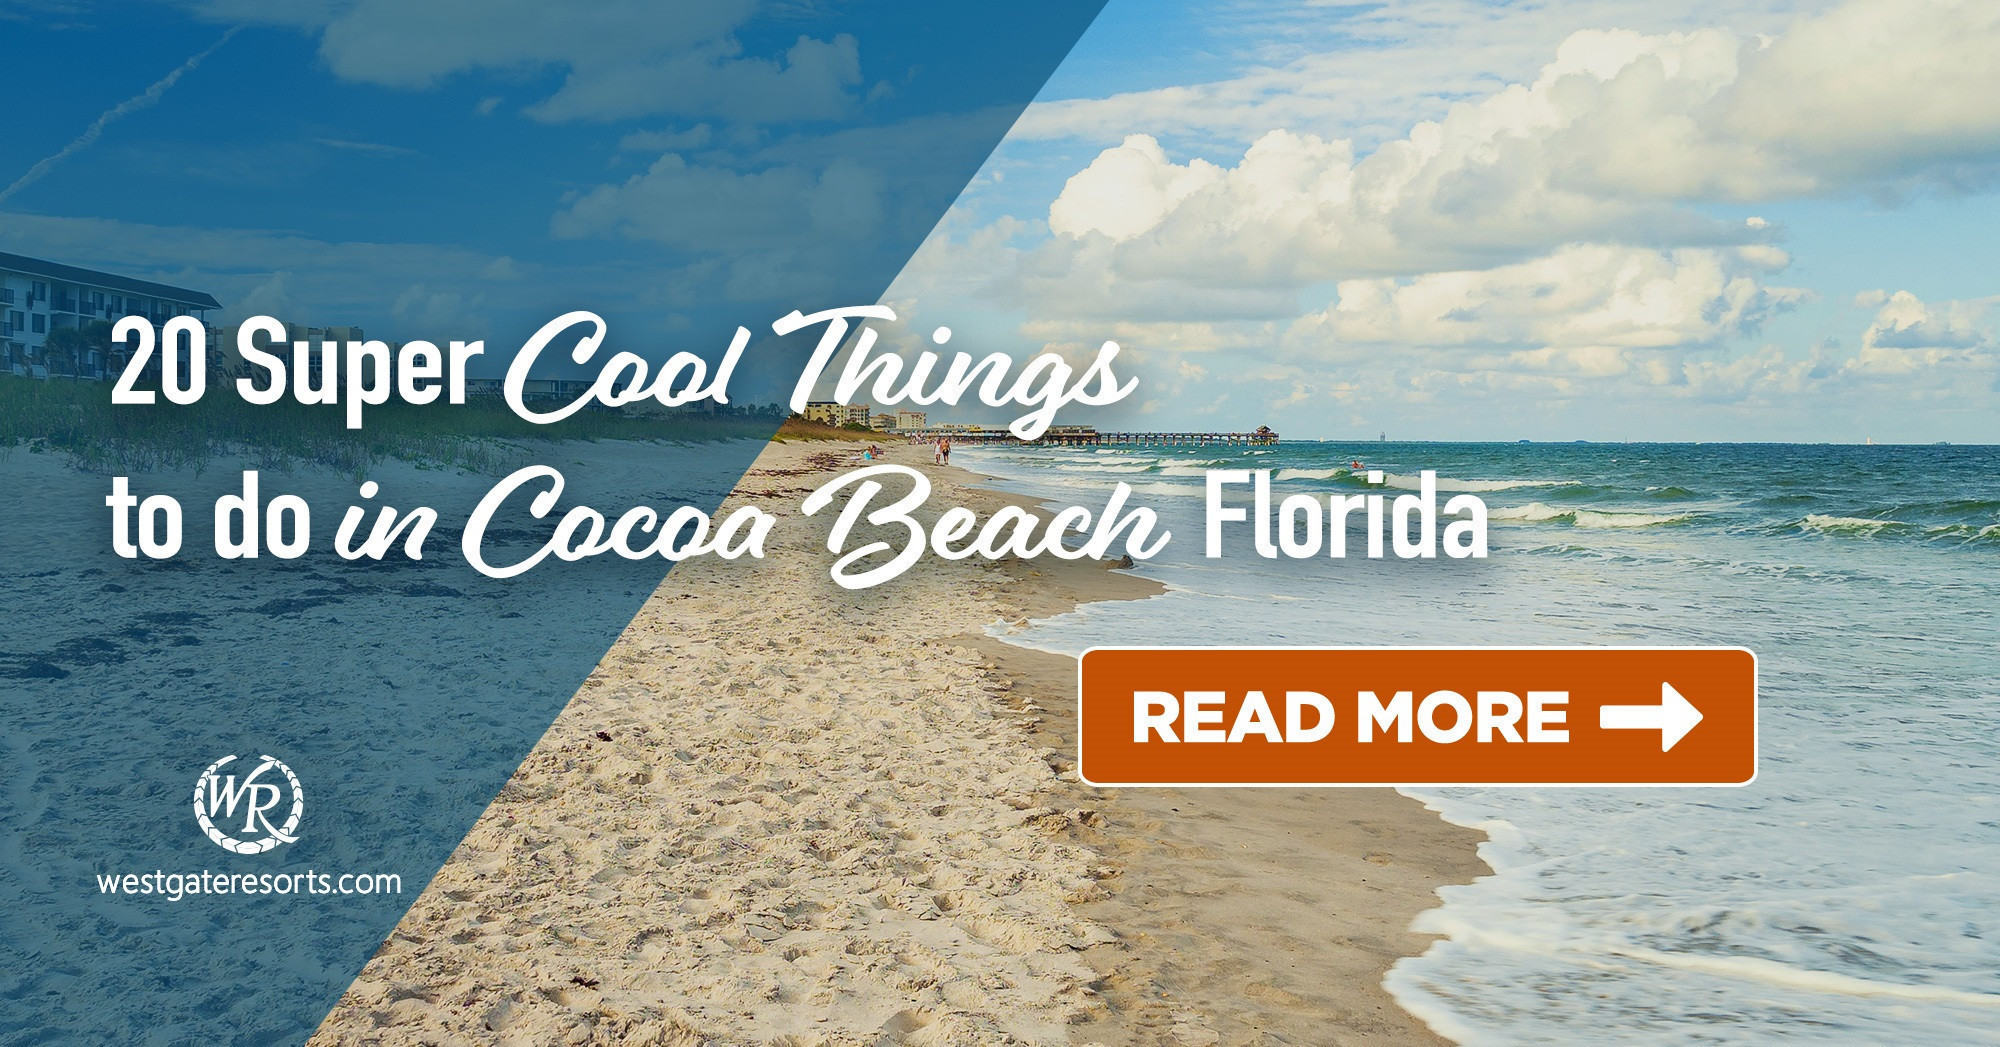 20 Super Cool Things to do in Cocoa Beach Florida